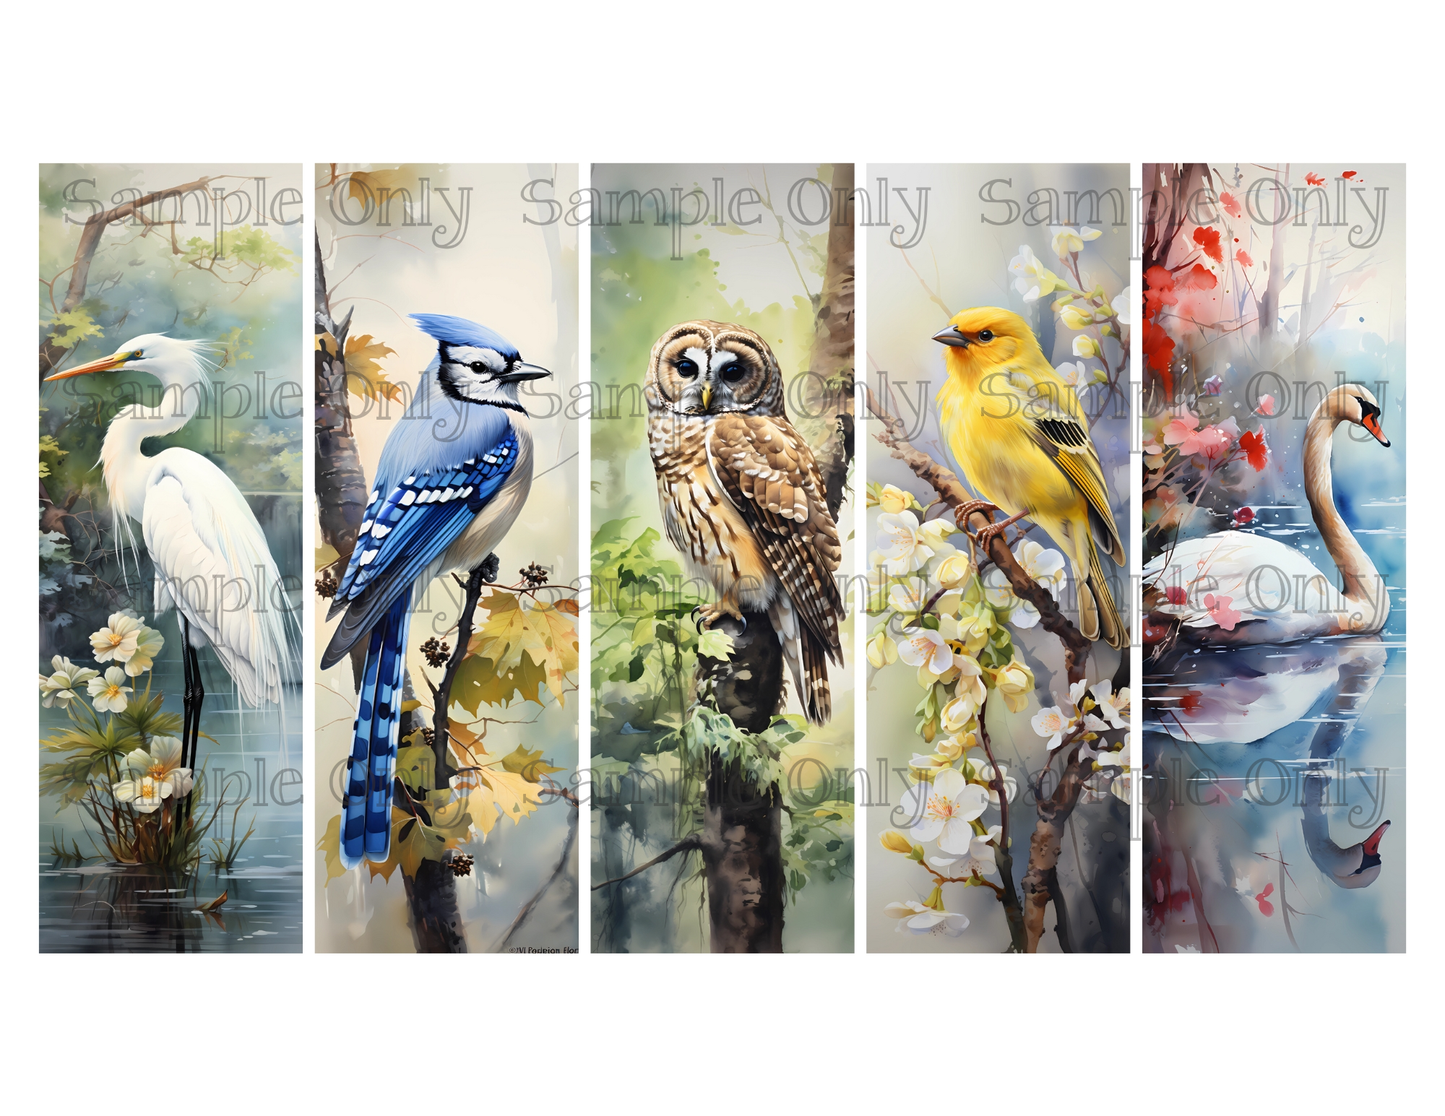 Wild Birds Bookmark Set 13 Printed Water Soluble Image Transfer Sheet For Polymer Clay